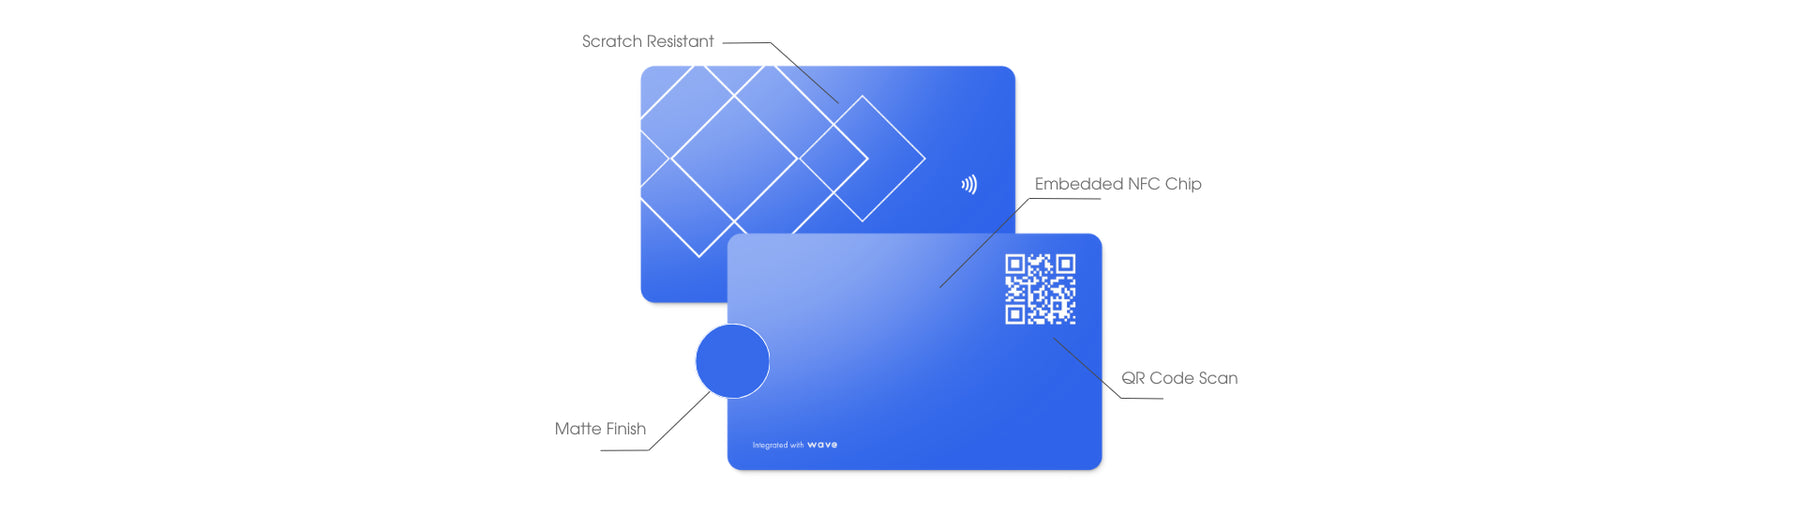 A blue wave smart card with feature specifications